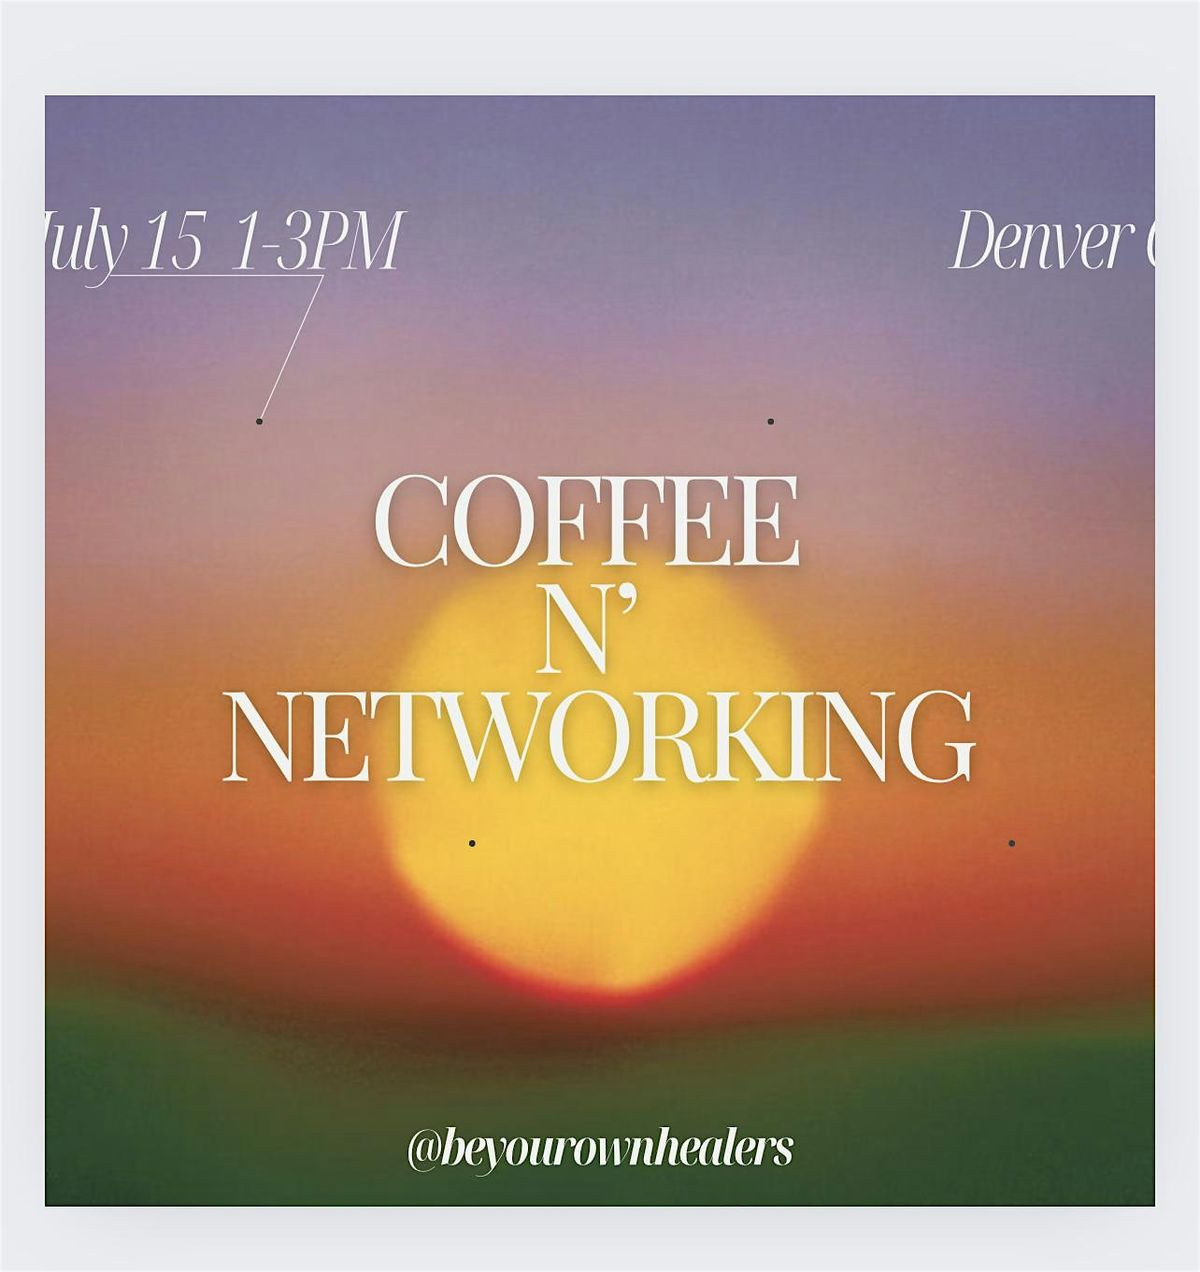 Womens Meet up  | COFFEE N CONSCIOUS NETWORKING